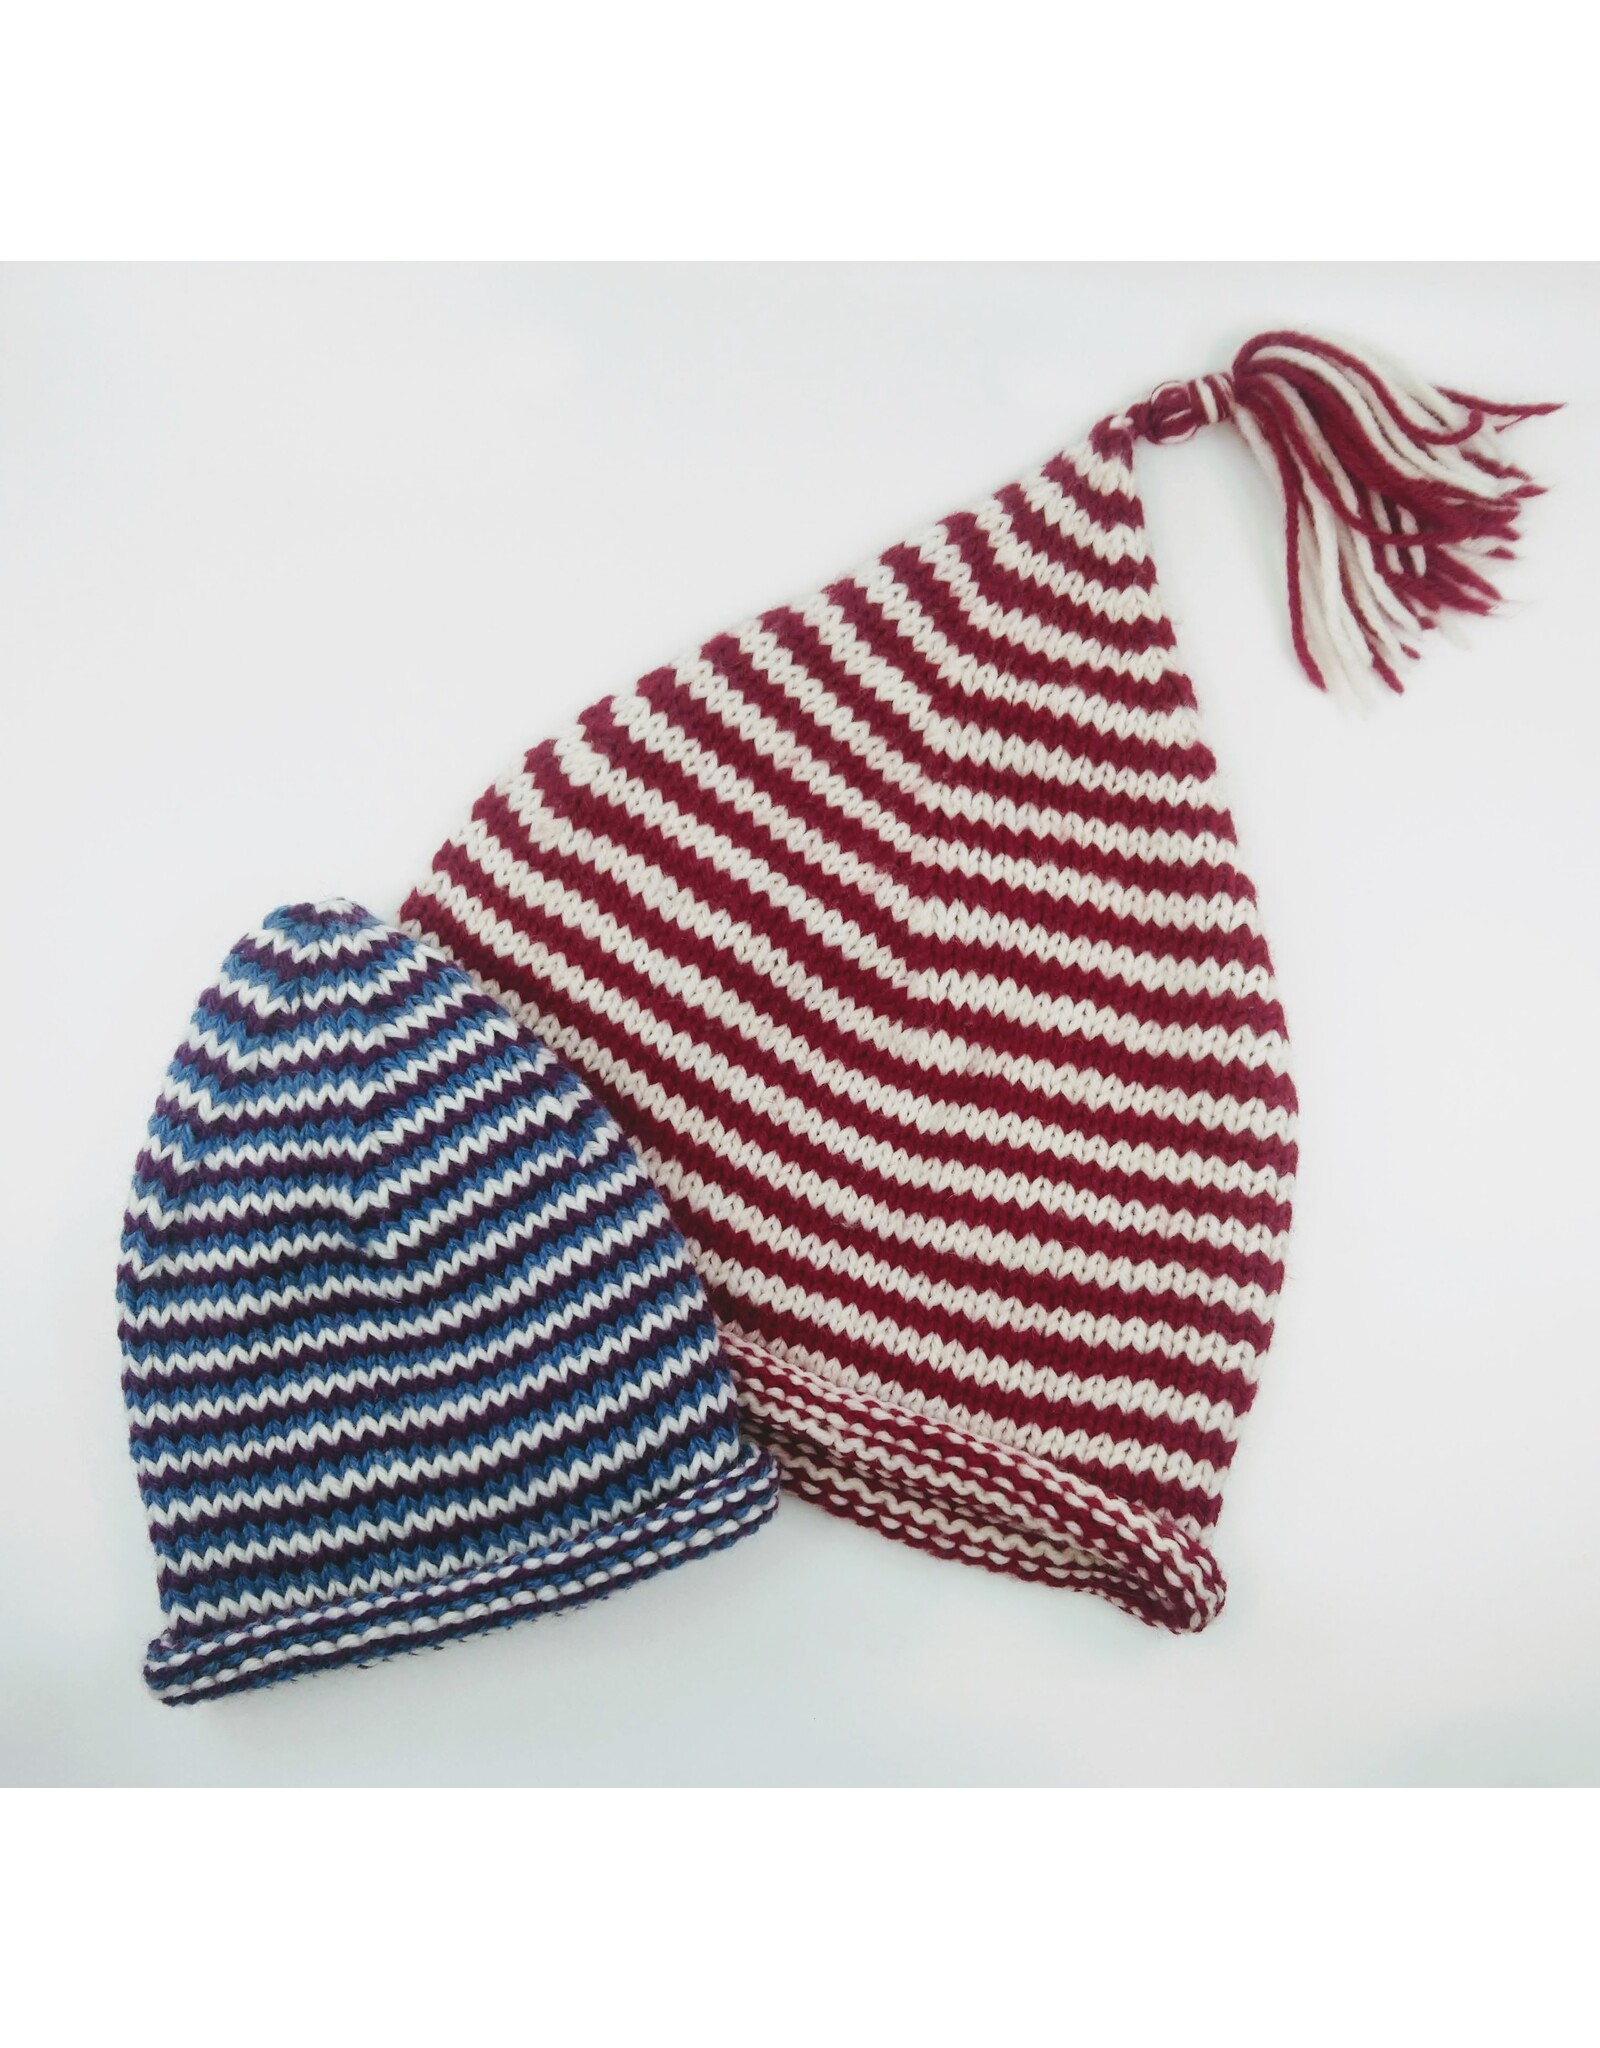 Stranded by the Sea Class: Helix Striped Hats